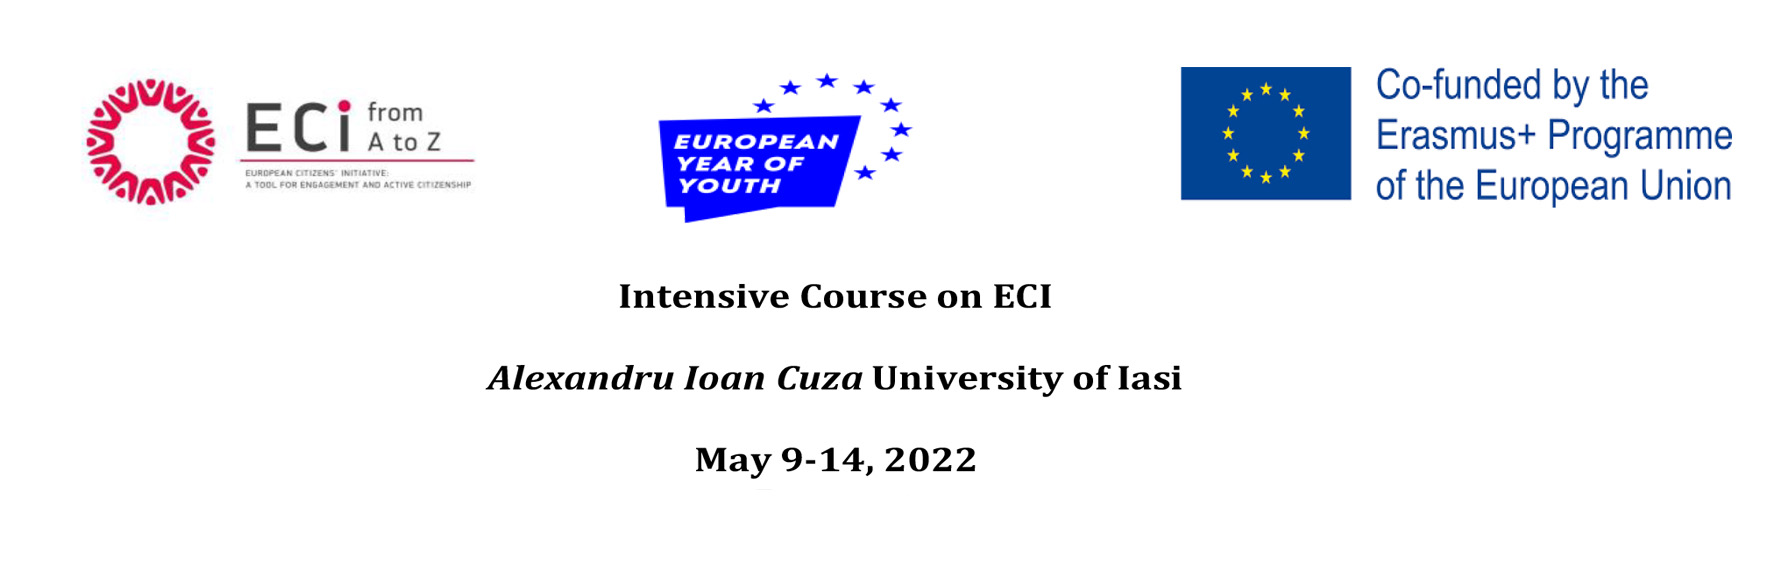 Intensive Course on ECI 2022 (On-site)